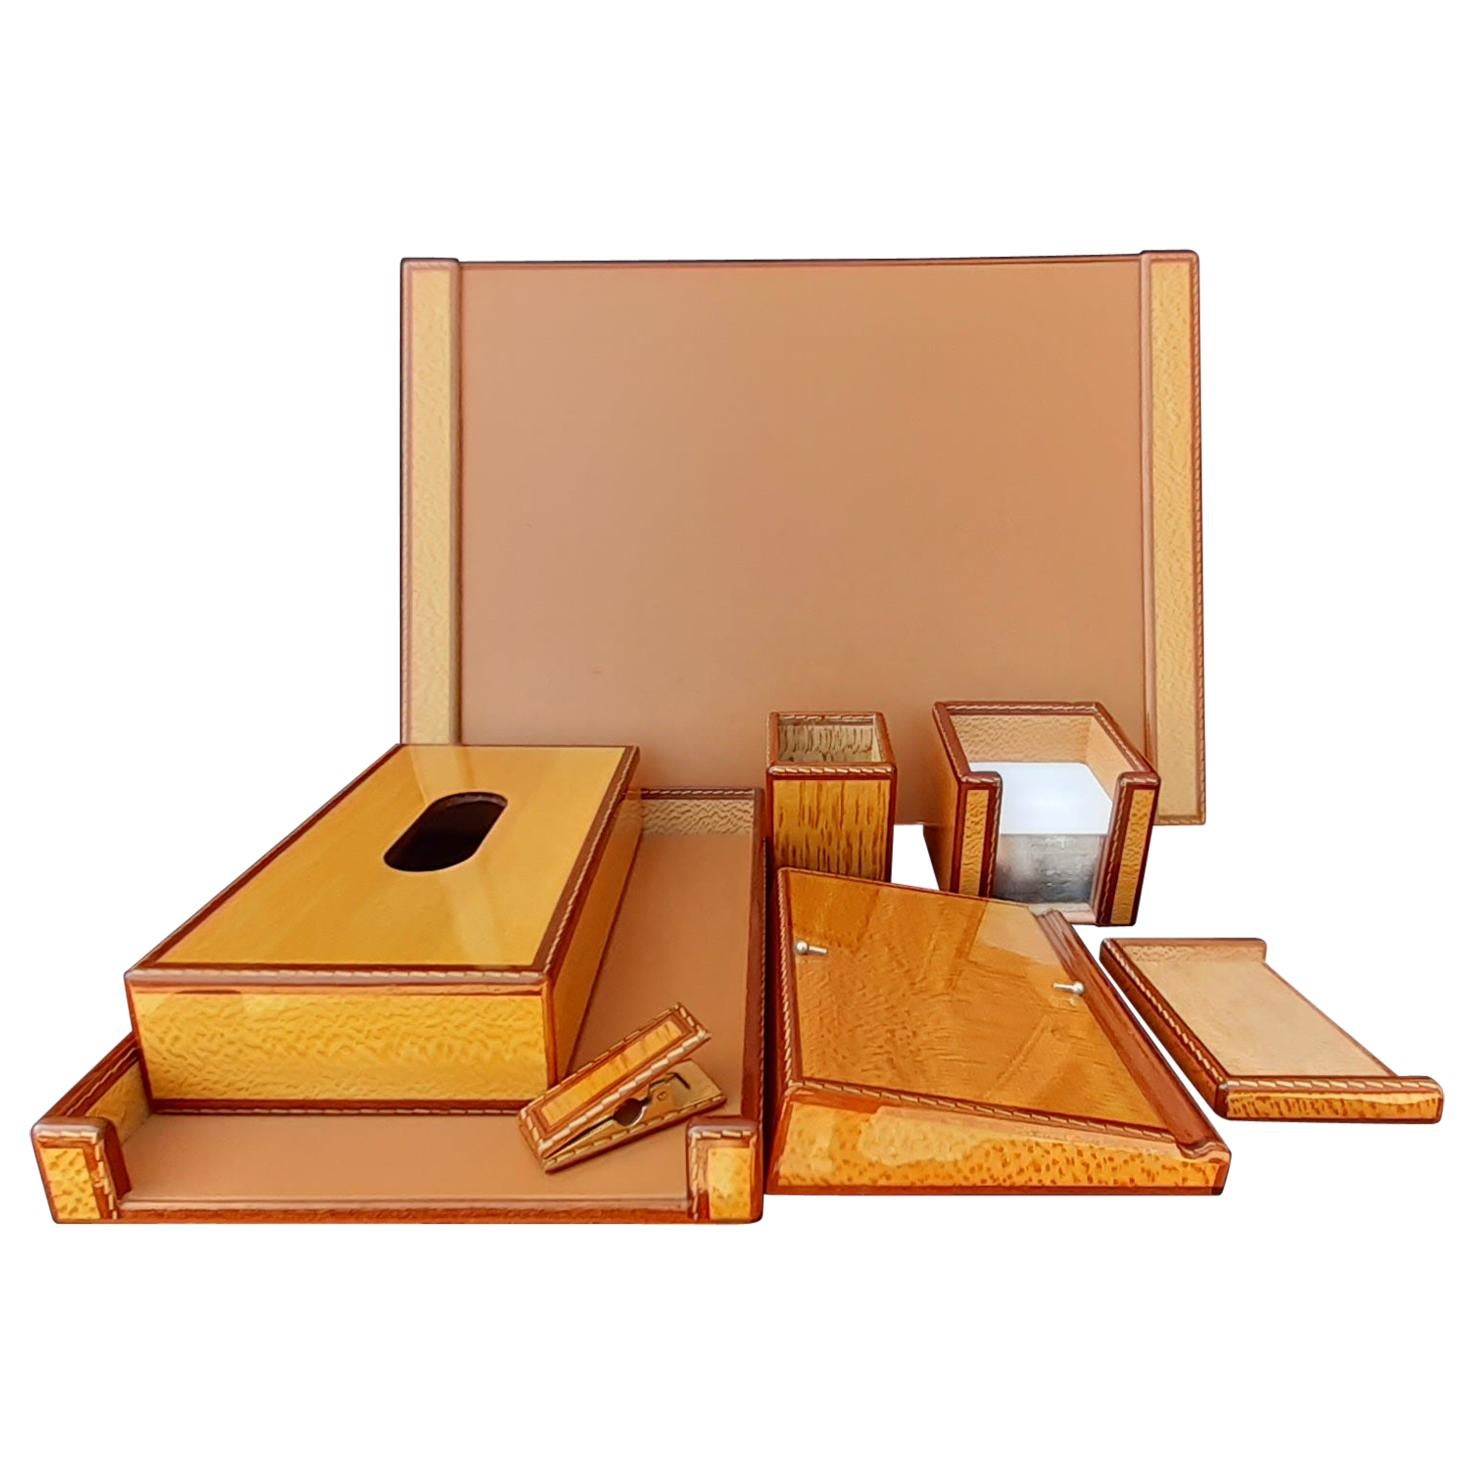 Exceptional Authentic Hermès Desk Set

9 pieces made of Lacquered Wood

Made in France

1. Desk Blotter: 52,5 x 37,7 x 1,3 cm (20,67 x 14,84 x 0,51 inches) / Made of leather, wood, Suede at bottom

2. Pencil Holder: 9,5 x 7 x 7 cm (3,74 x 2,76 x